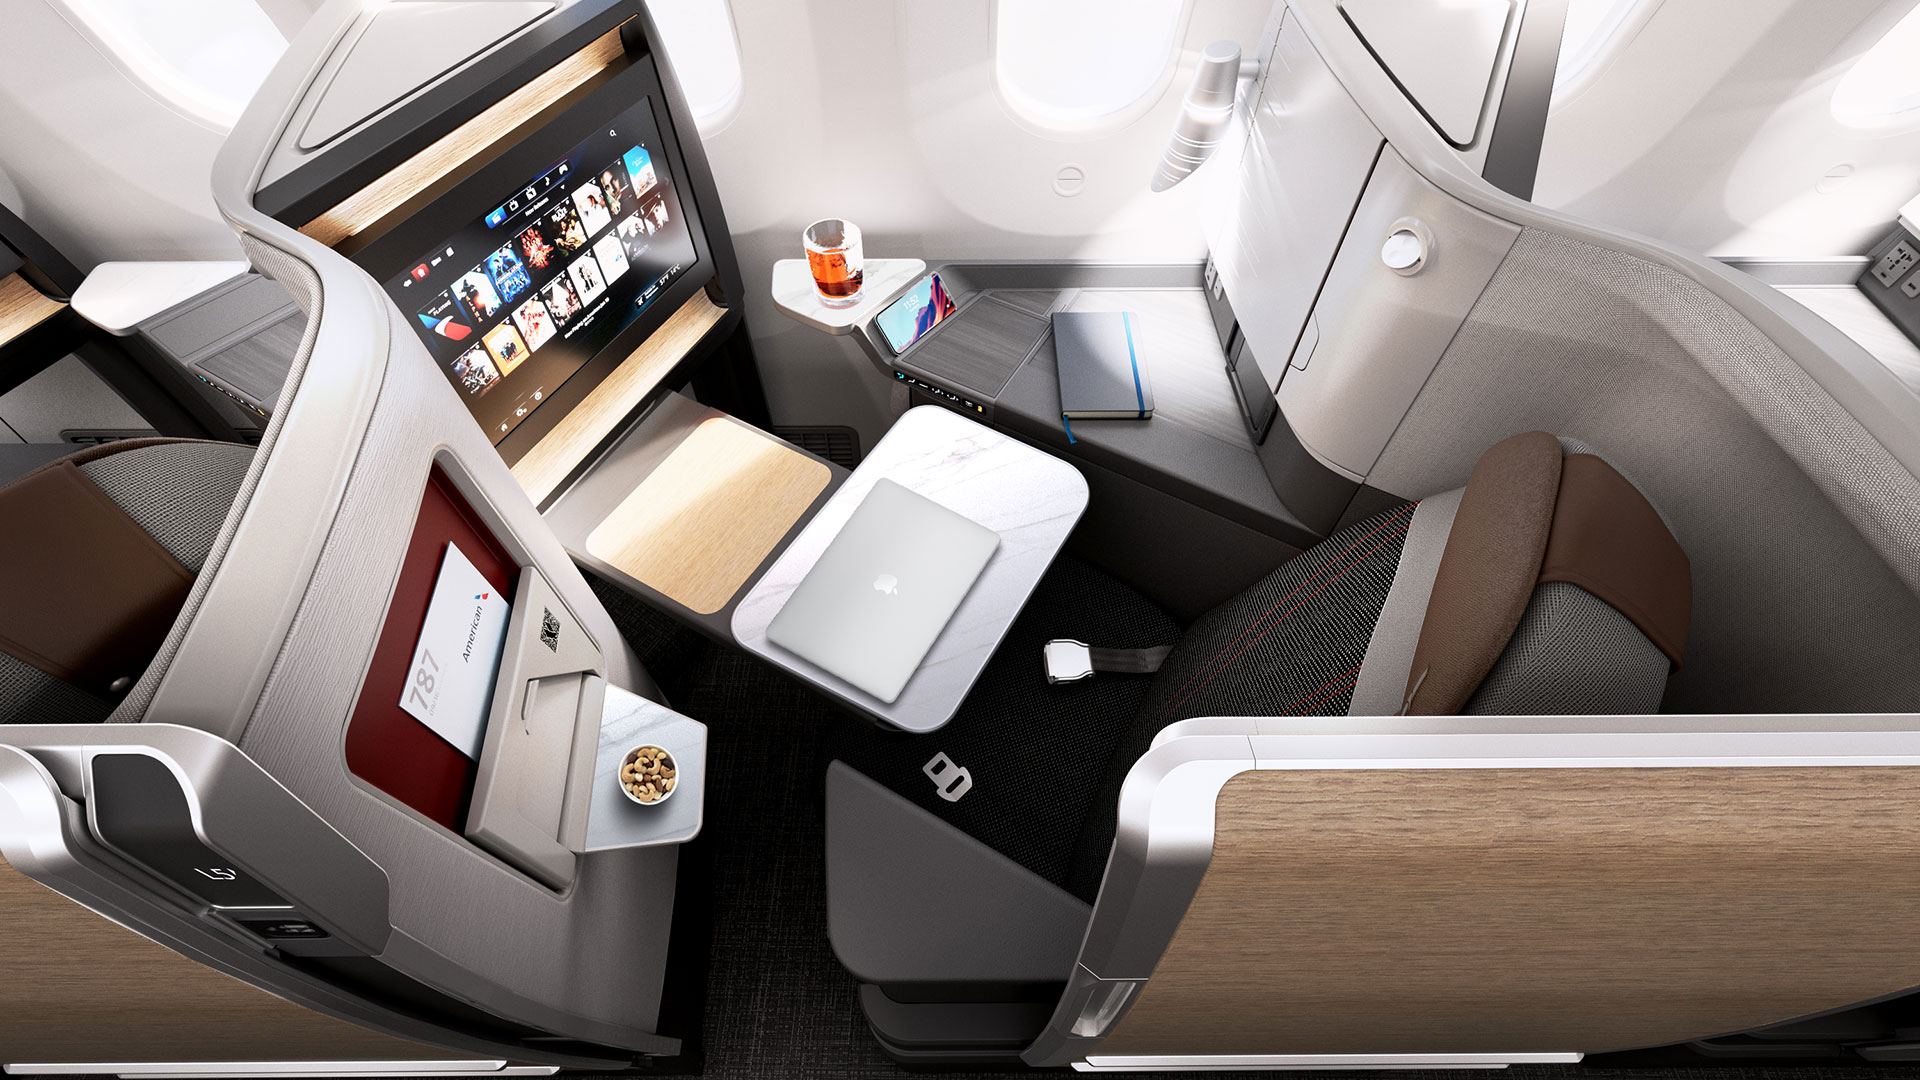 Customers will be surrounded by comfort and ample personal surfaces and storage areas that they can use to meet their personal needs in the Boeing 787-9 Flagship Suite